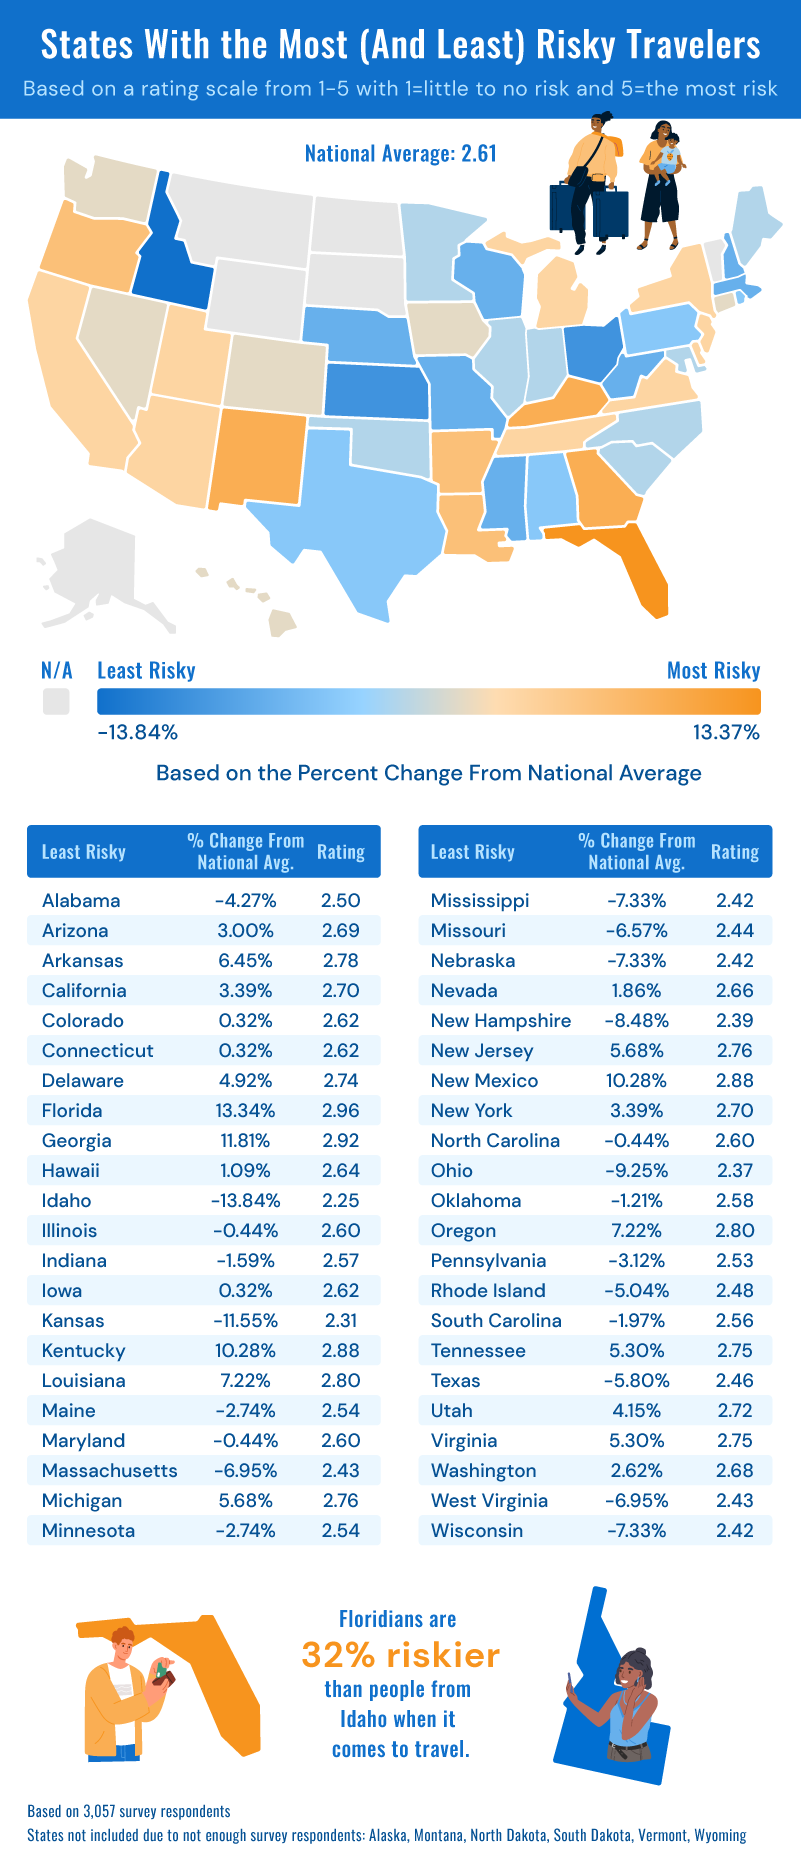 States With the Most and Least Risky Travelers